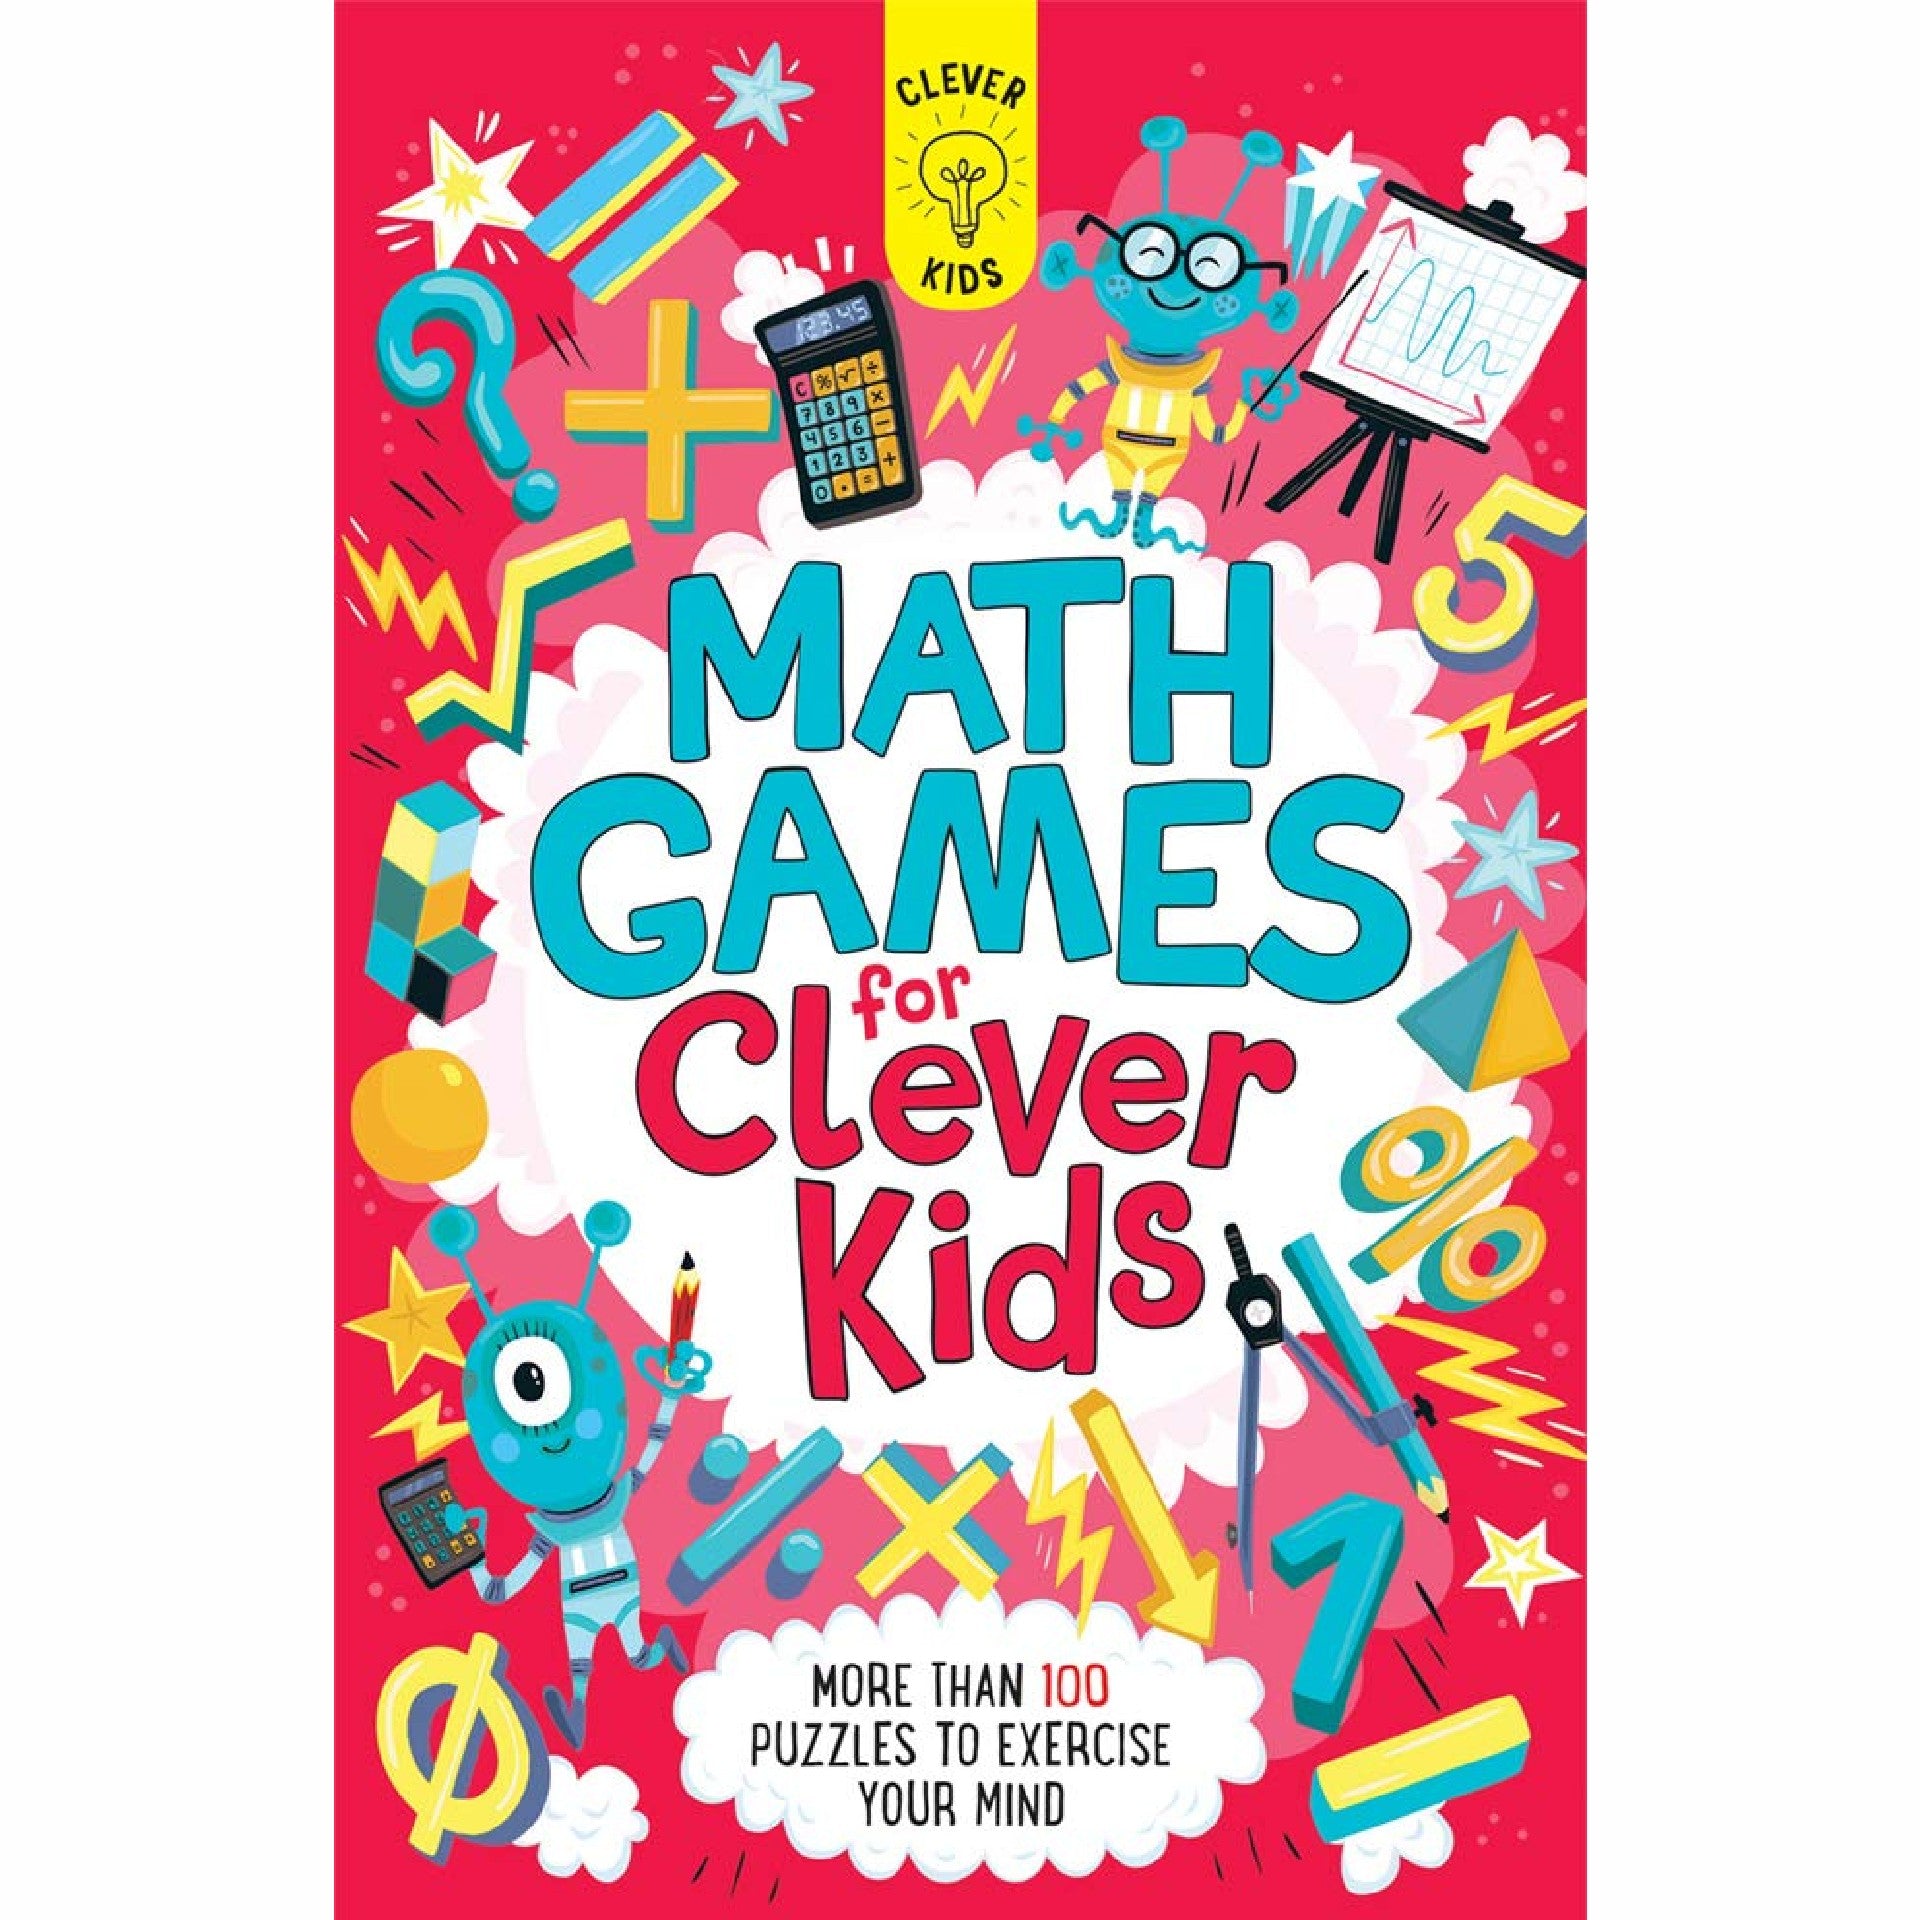 Math Games for Clever Kids: More than 100 Puzzles to Exercise Your Mind